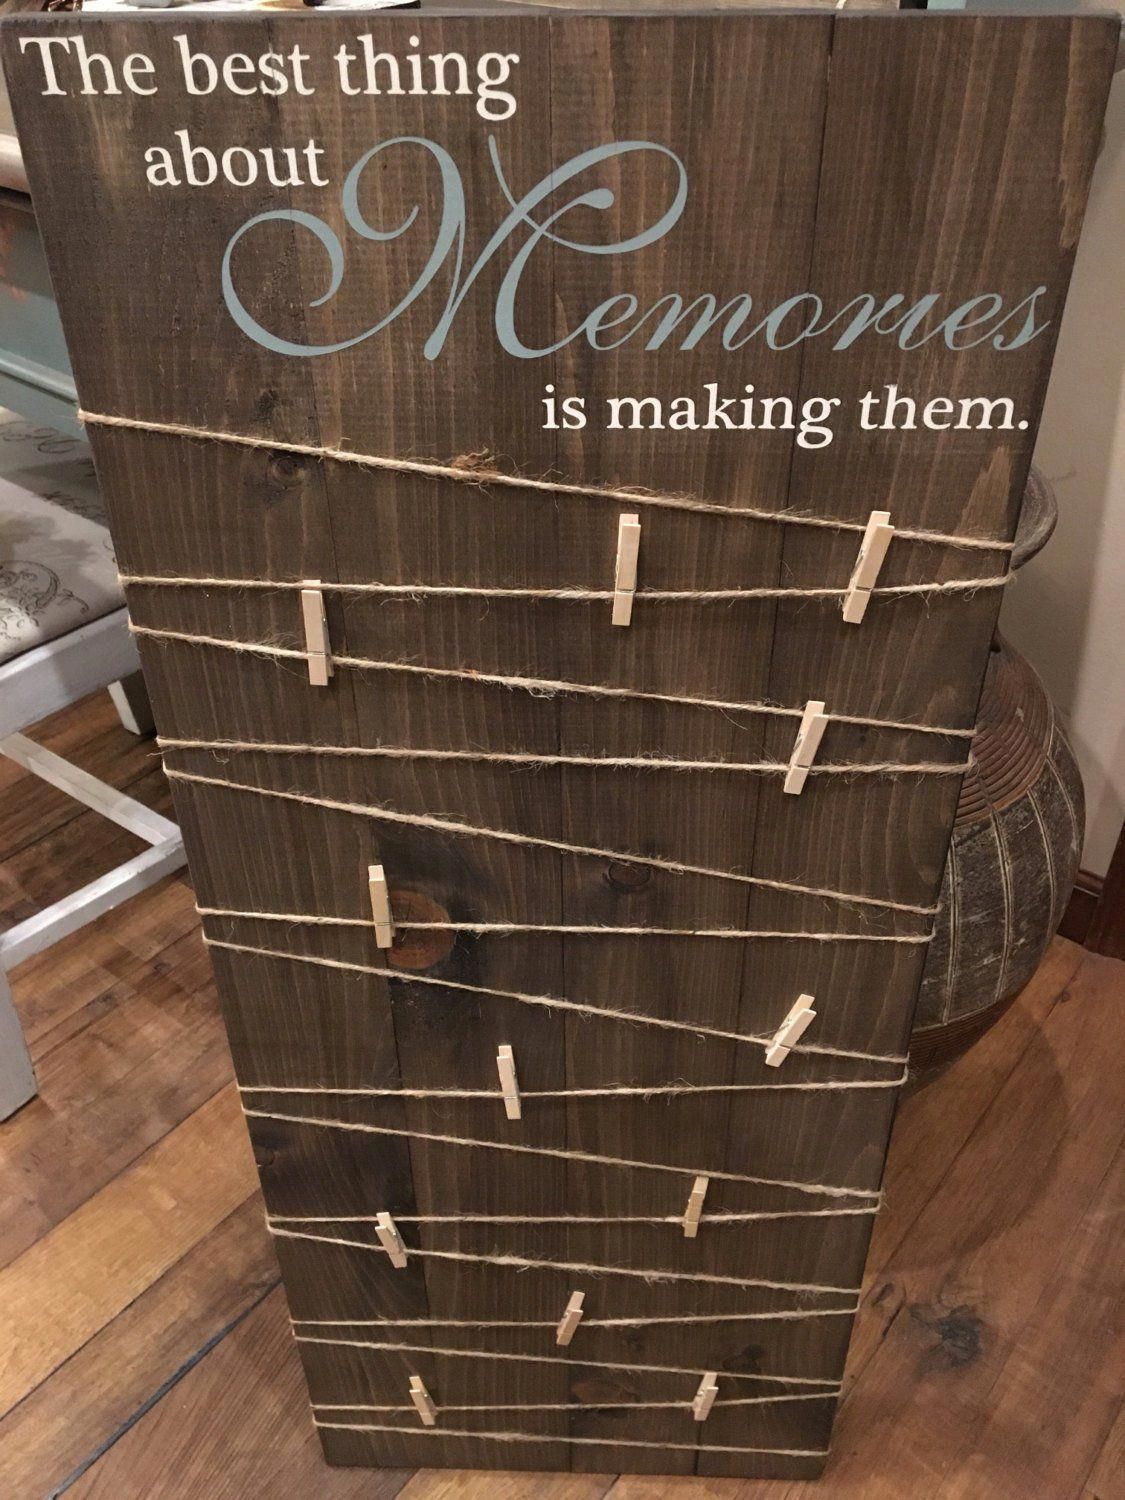 Making Memories Wooden Sign / Picture Board with clips / Photo Board with clips / Wood Picture Frame /Wood Photo Sign /Picture Display Board - Making Memories Wooden Sign / Picture Board with clips / Photo Board with clips / Wood Picture Frame /Wood Photo Sign /Picture Display Board -   17 diy Wood rustic ideas